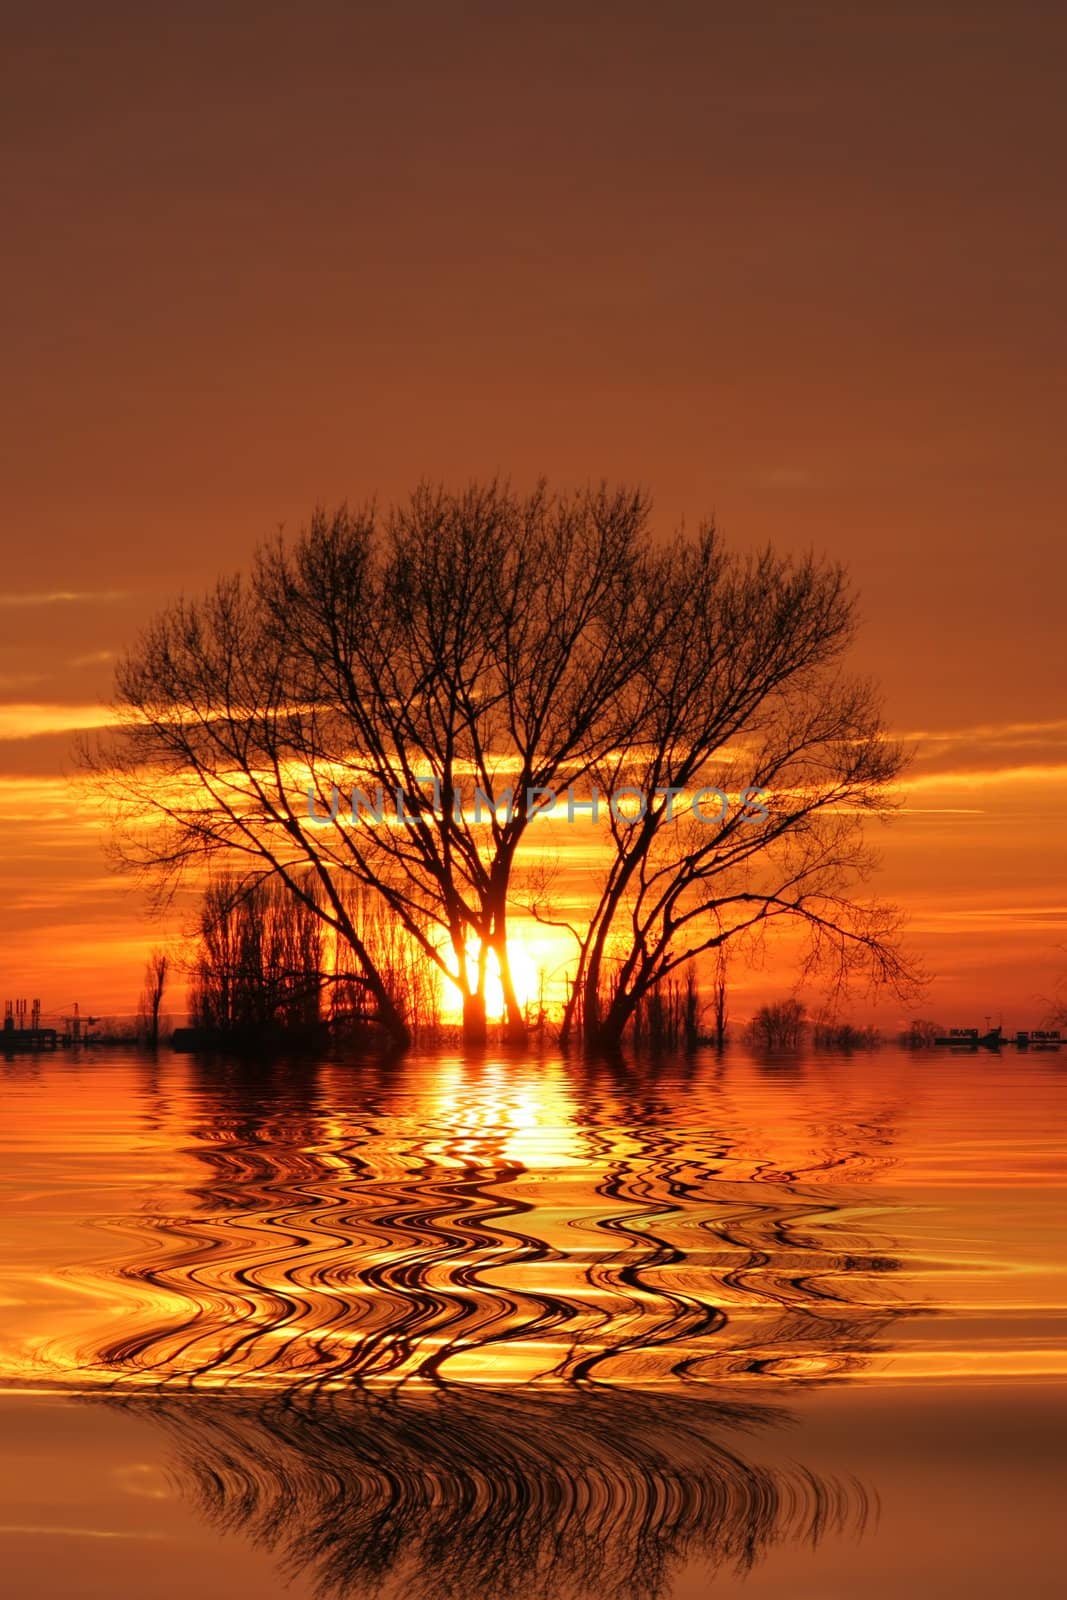 Setting sun behind trees with reflection